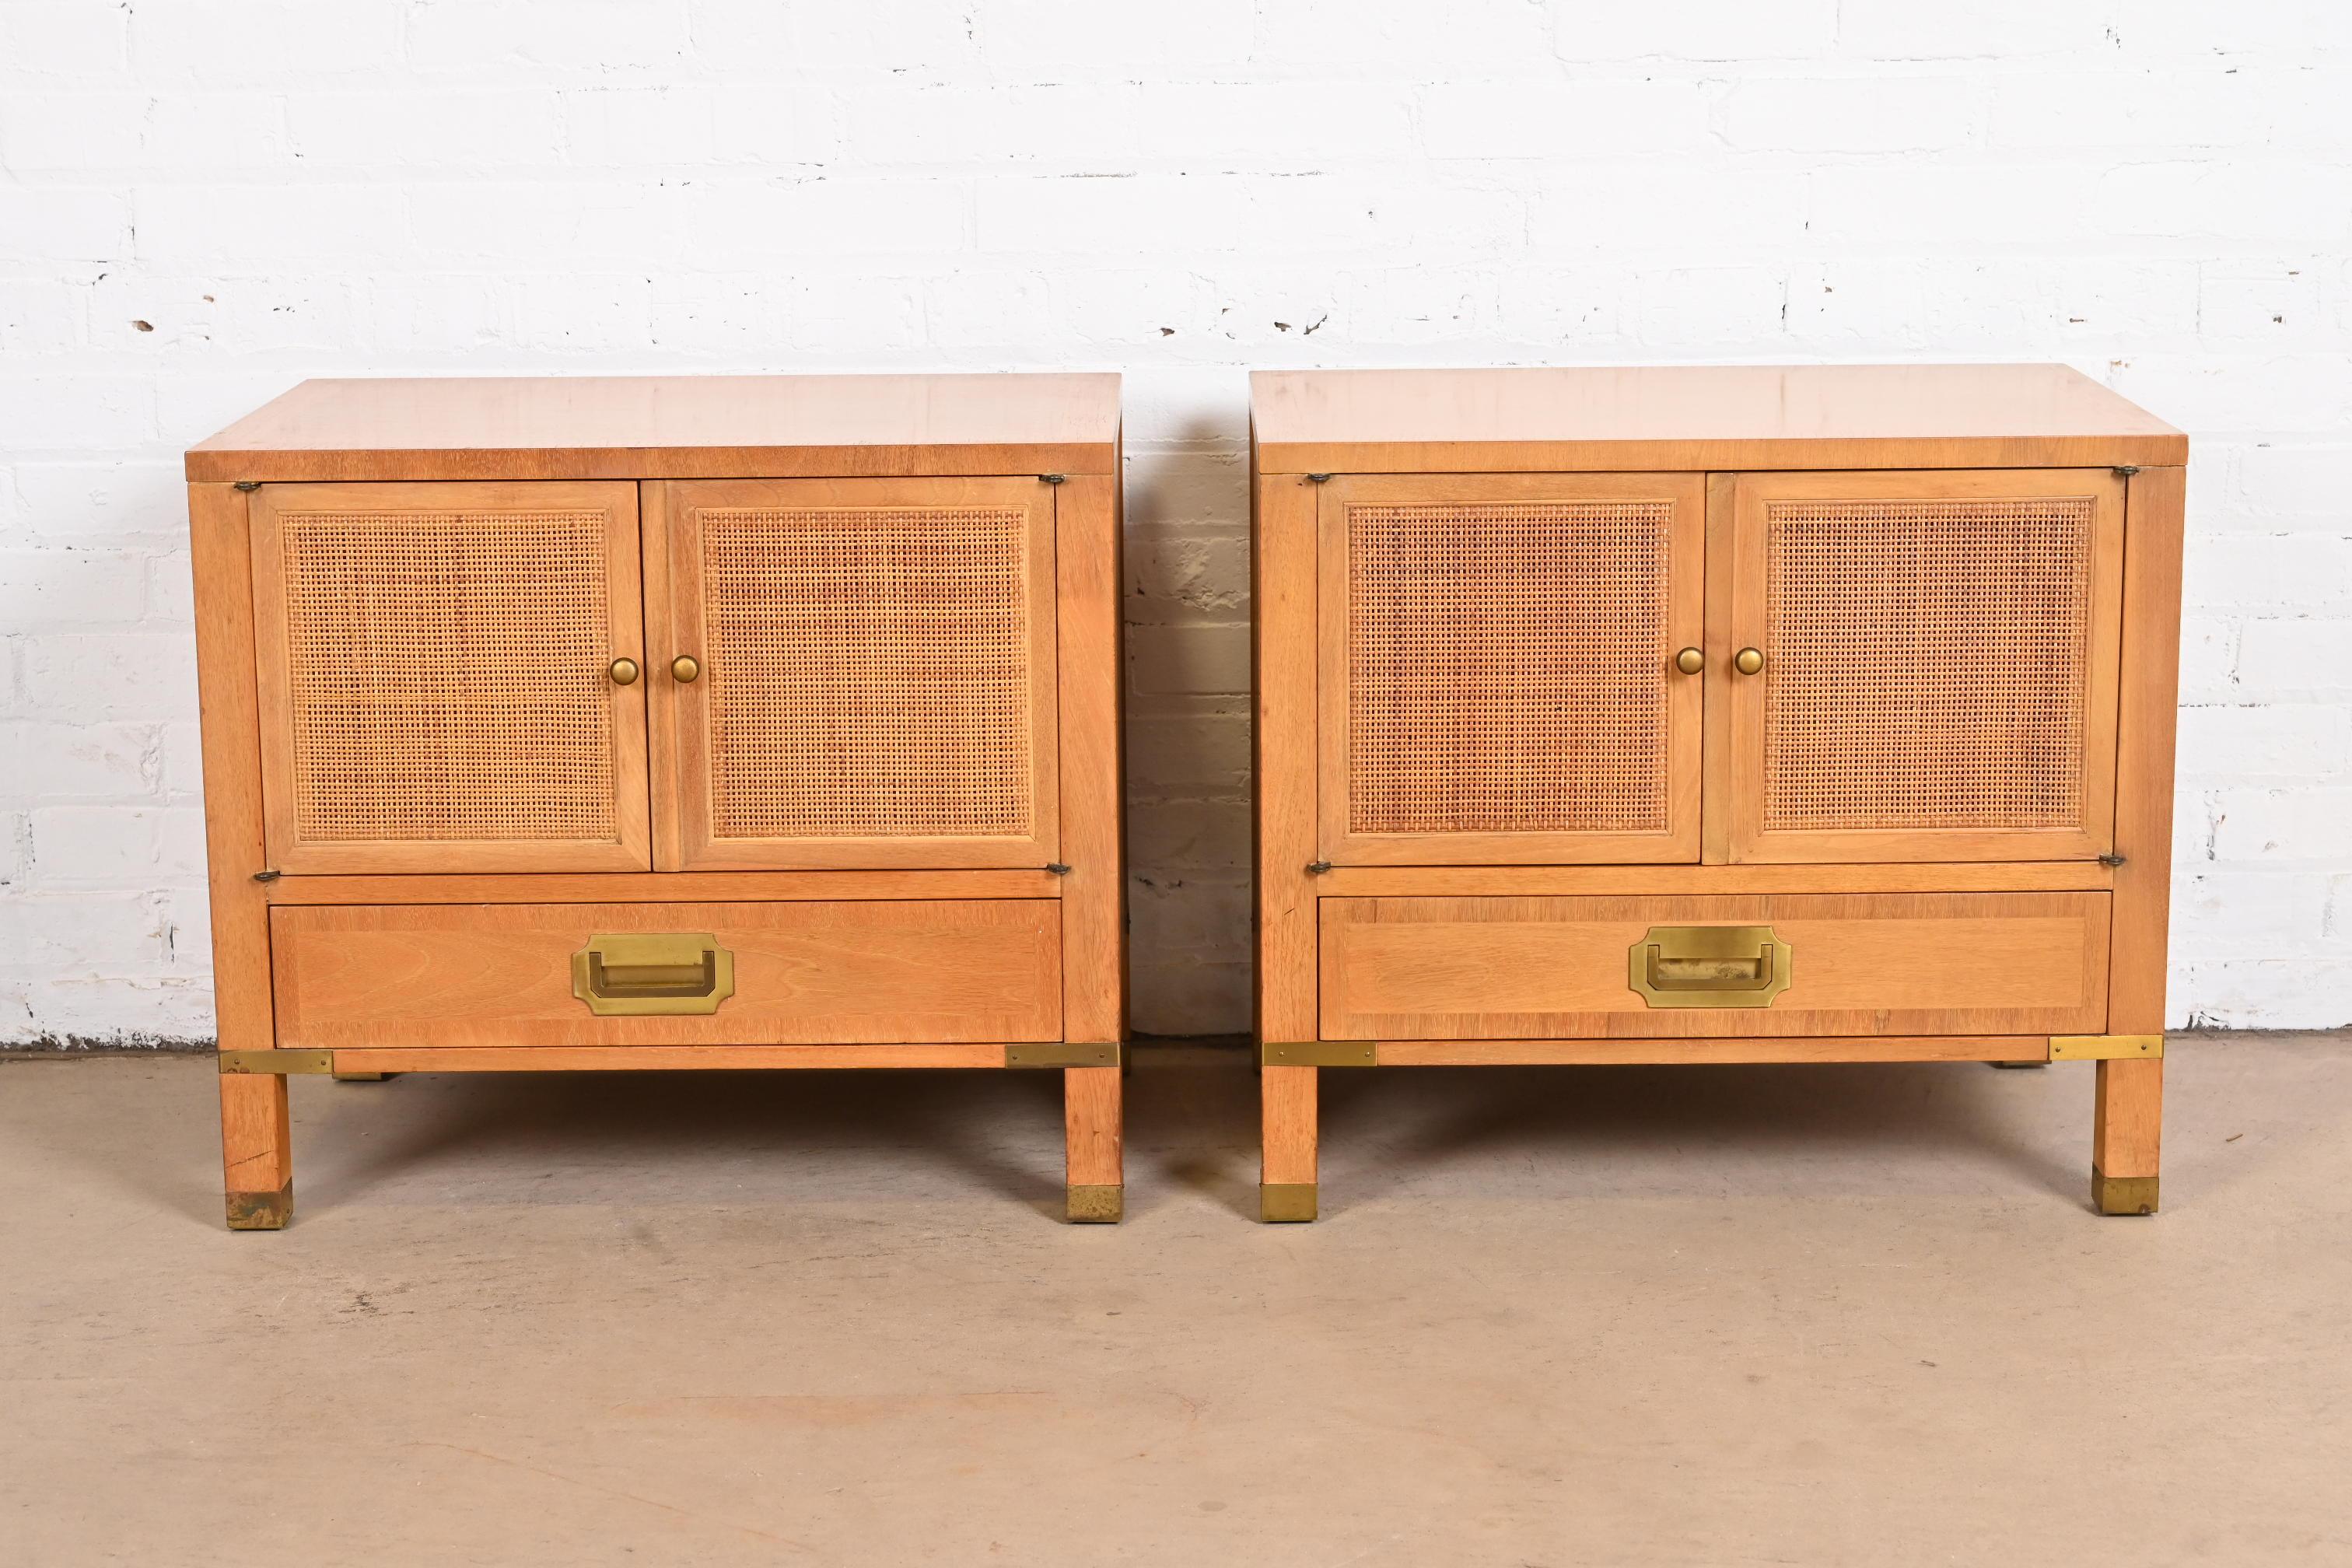 An exceptional pair of Mid-Century Modern Hollywood Regency Campaign nightstands or end tables.

Produced by Grand Rapids Chair Co. for Baker Furniture, 